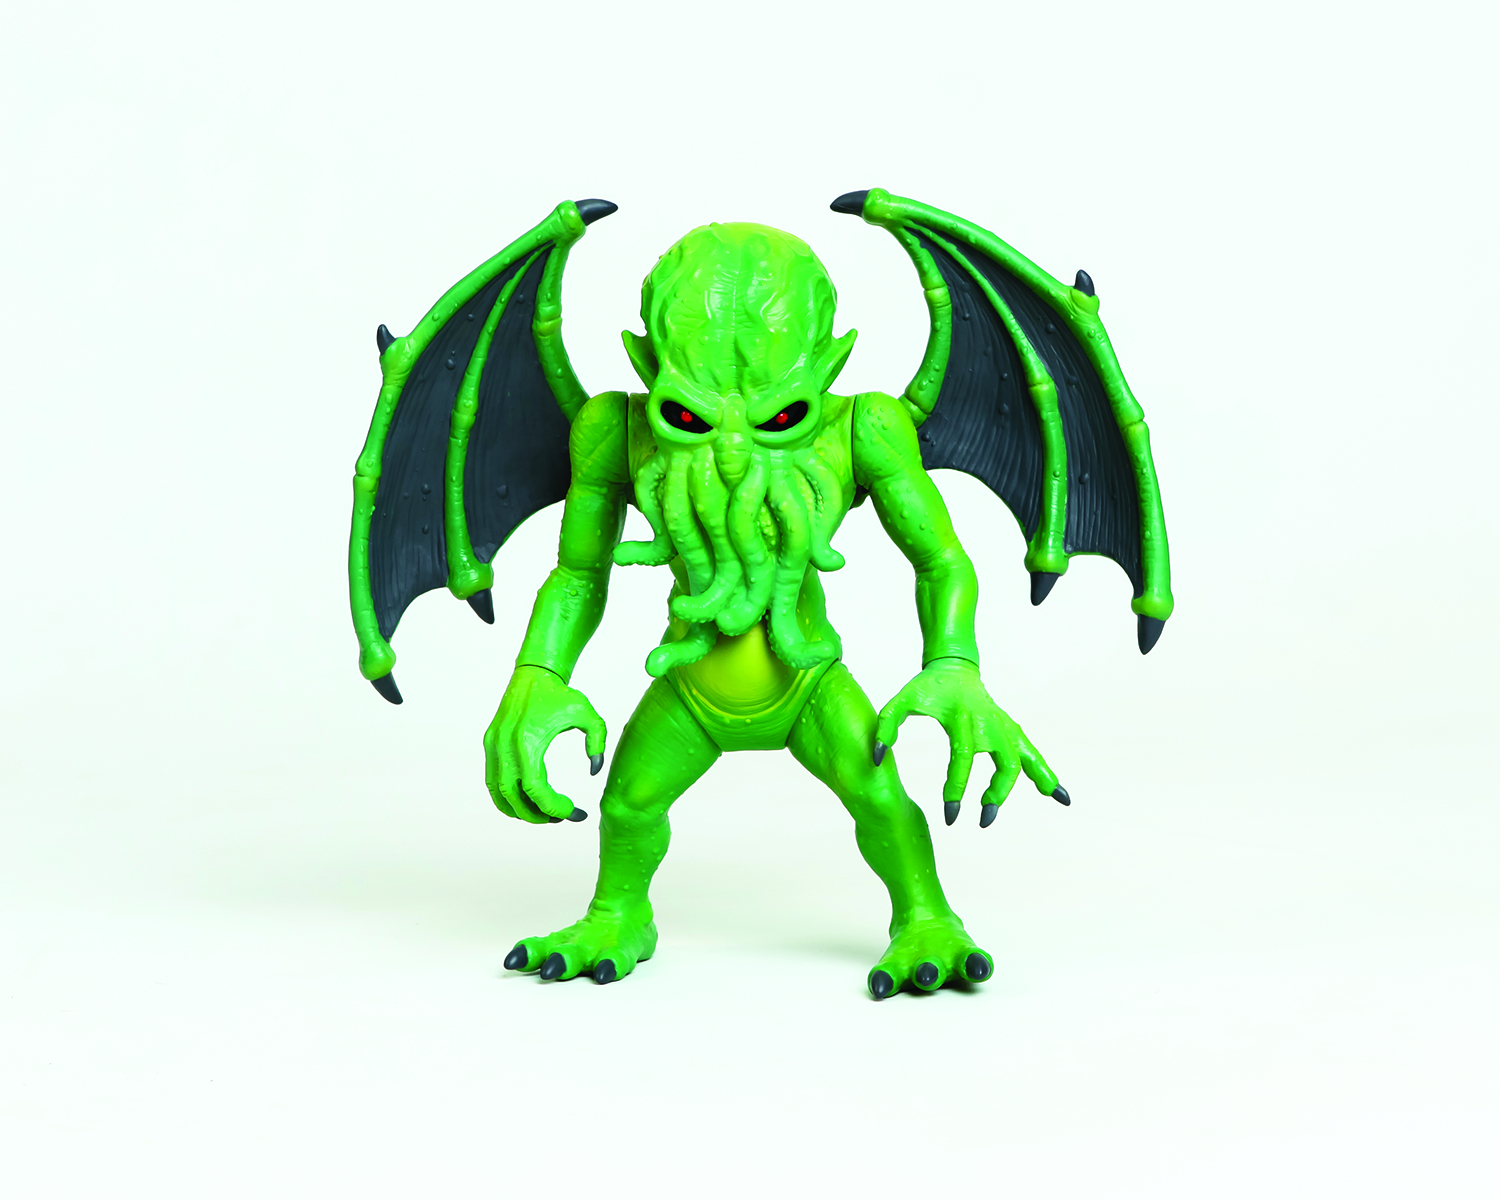 LEGENDS OF CTHULHU CTHULHU 12IN RETAILER ED FIG